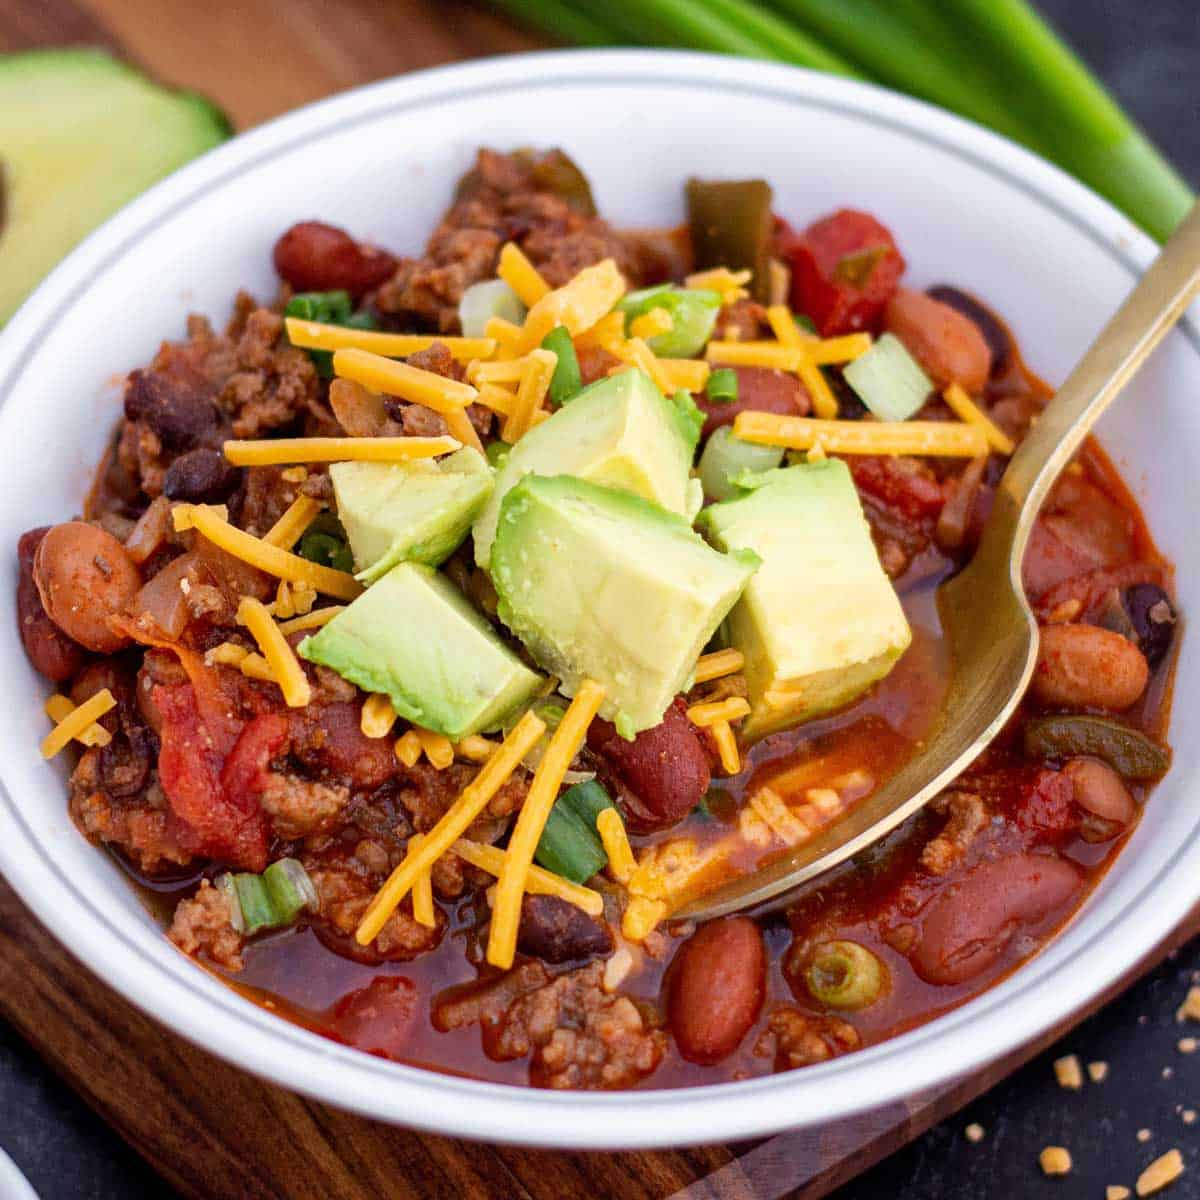 Small bowl of ground beef and sausage chili with shredded cheddar and diced avocado on top.